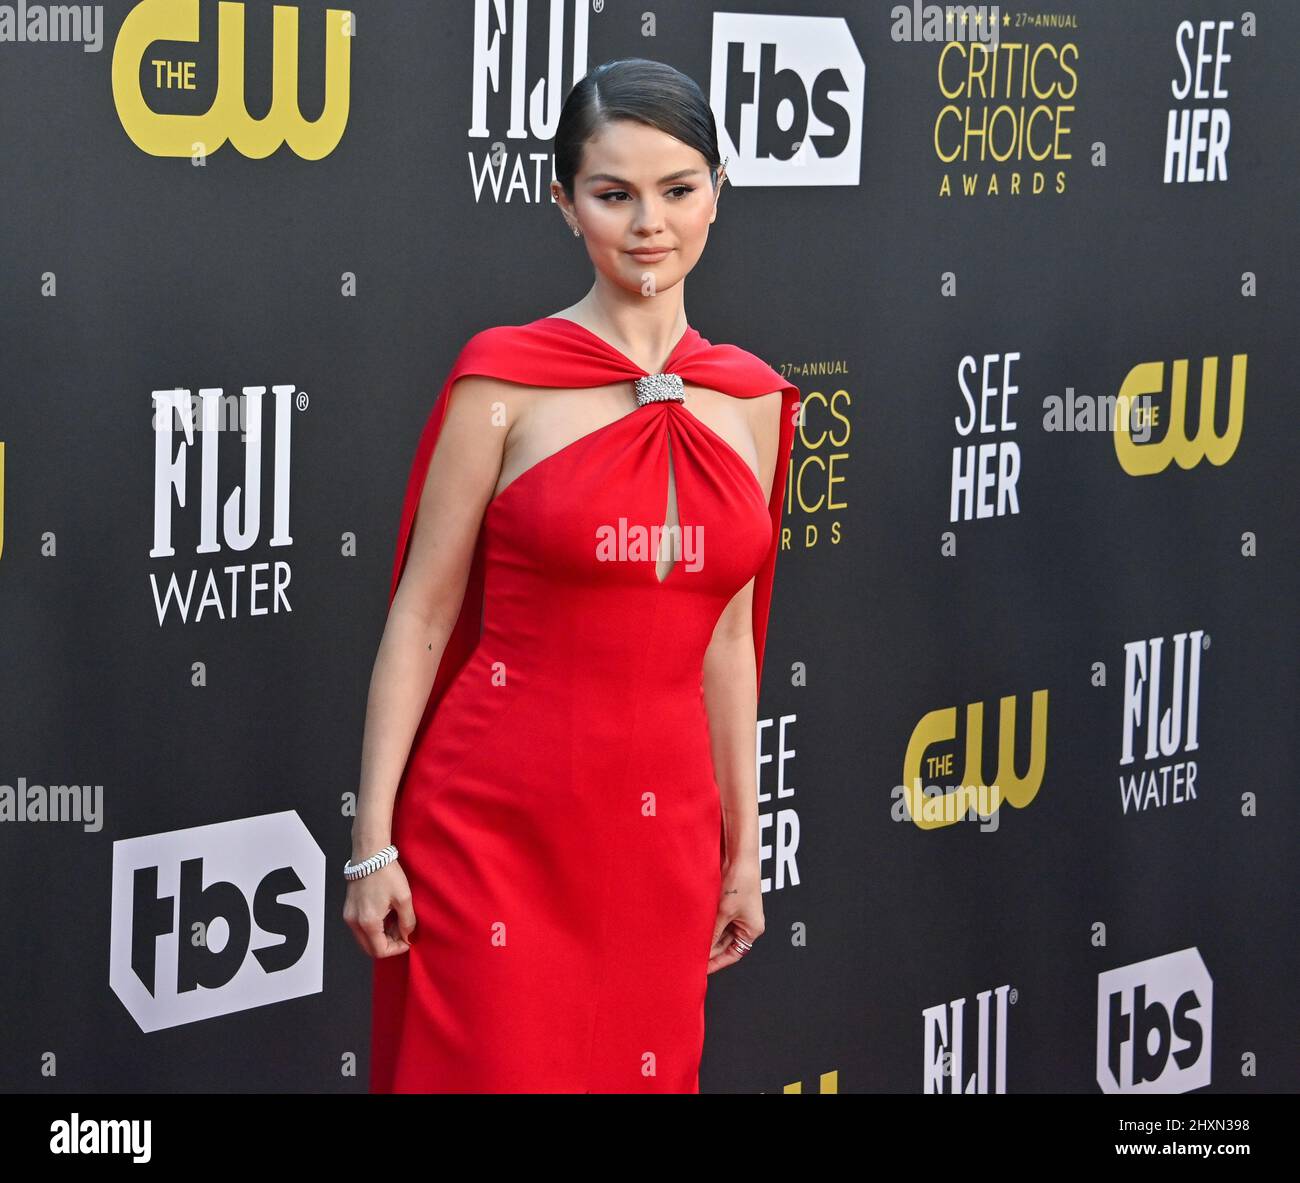 Critics Choice Awards 2022: Selena Gomez Picks a Stunning Red Louis Vuitton  Gown for Her Appearance